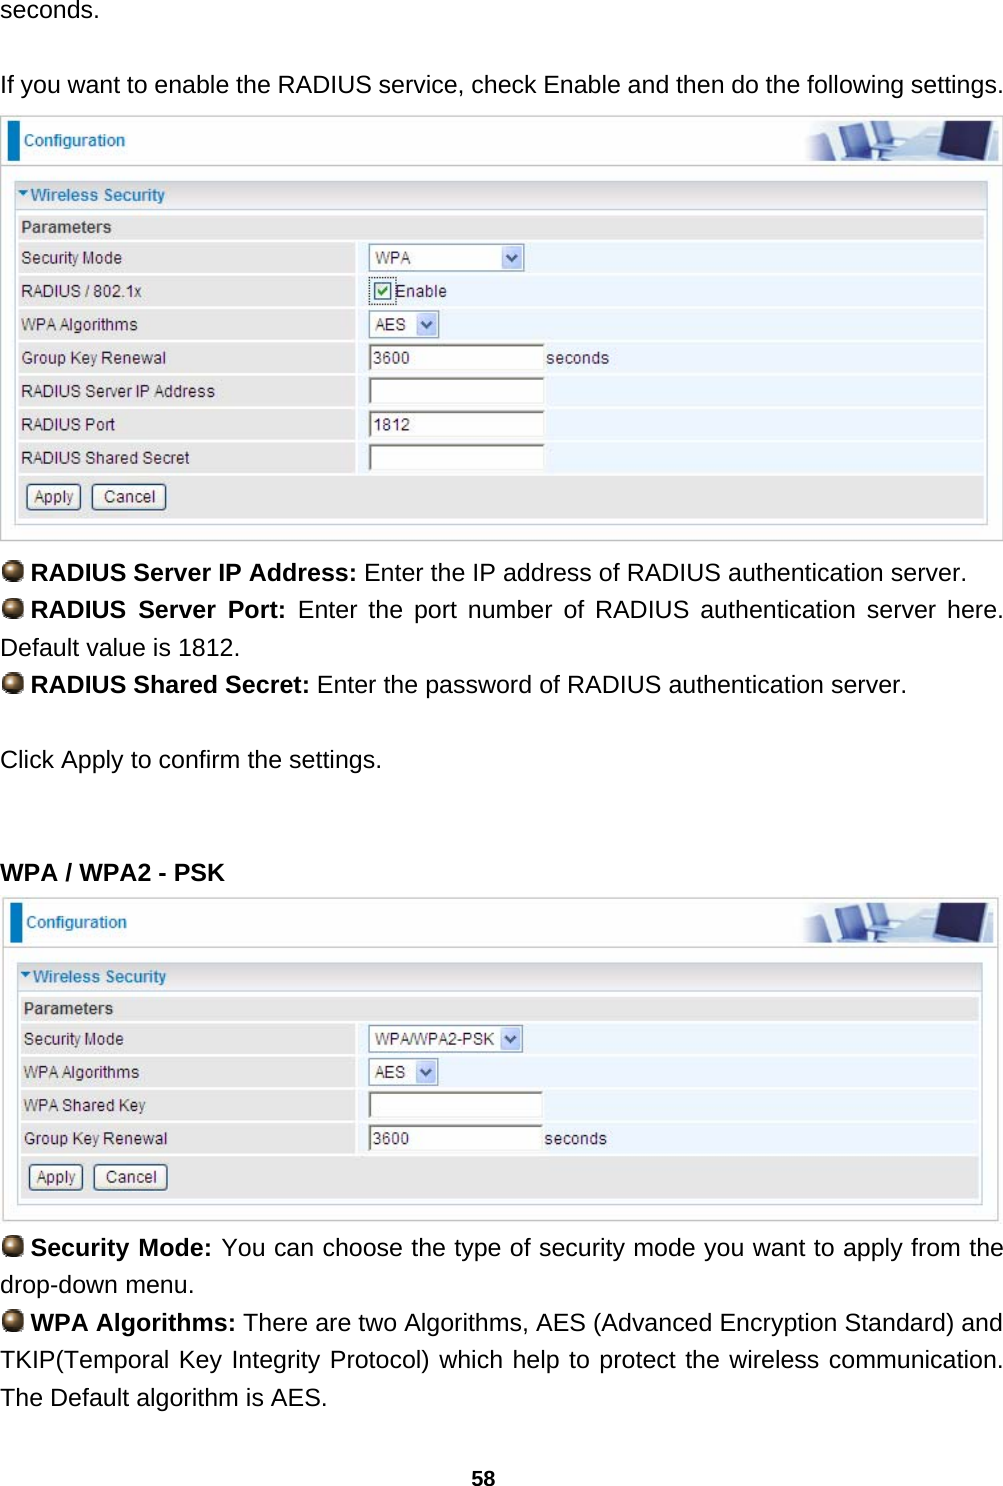 58 seconds.  If you want to enable the RADIUS service, check Enable and then do the following settings.   RADIUS Server IP Address: Enter the IP address of RADIUS authentication server.  RADIUS  Server  Port:  Enter the port number of RADIUS authentication server here. Default value is 1812.  RADIUS Shared Secret: Enter the password of RADIUS authentication server.  Click Apply to confirm the settings.   WPA / WPA2 - PSK   Security Mode: You can choose the type of security mode you want to apply from the drop-down menu.  WPA Algorithms: There are two Algorithms, AES (Advanced Encryption Standard) and TKIP(Temporal Key Integrity Protocol) which help to protect the wireless communication. The Default algorithm is AES. 